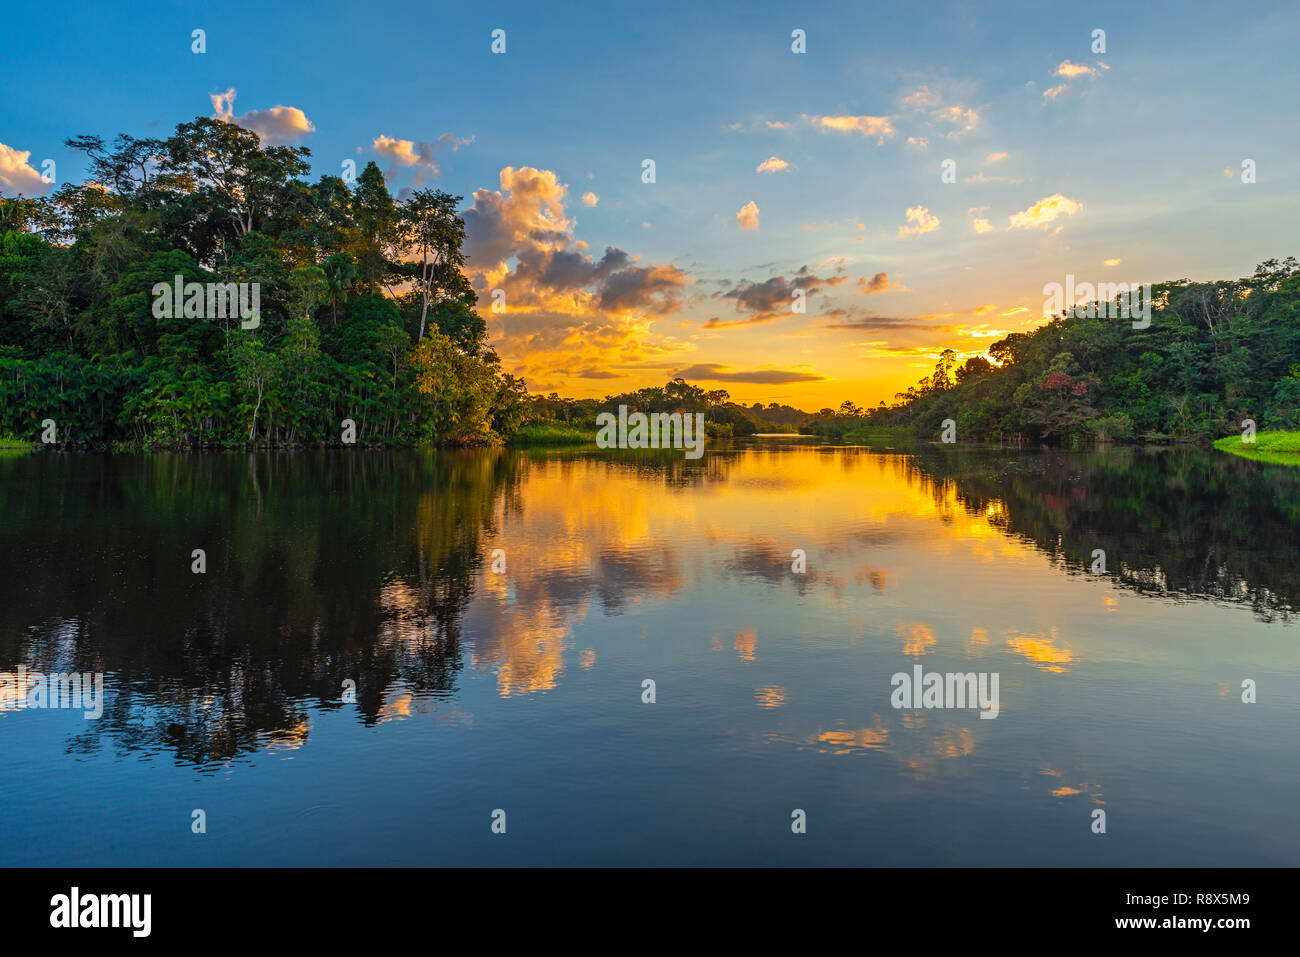 Reflection of a sunset in the Amazon Rainforest Basin. The countries of Brazil, Bolivia, Colombia, Ecuador, Peru, Venezuela, Guyana and Suriname. Stock Photo